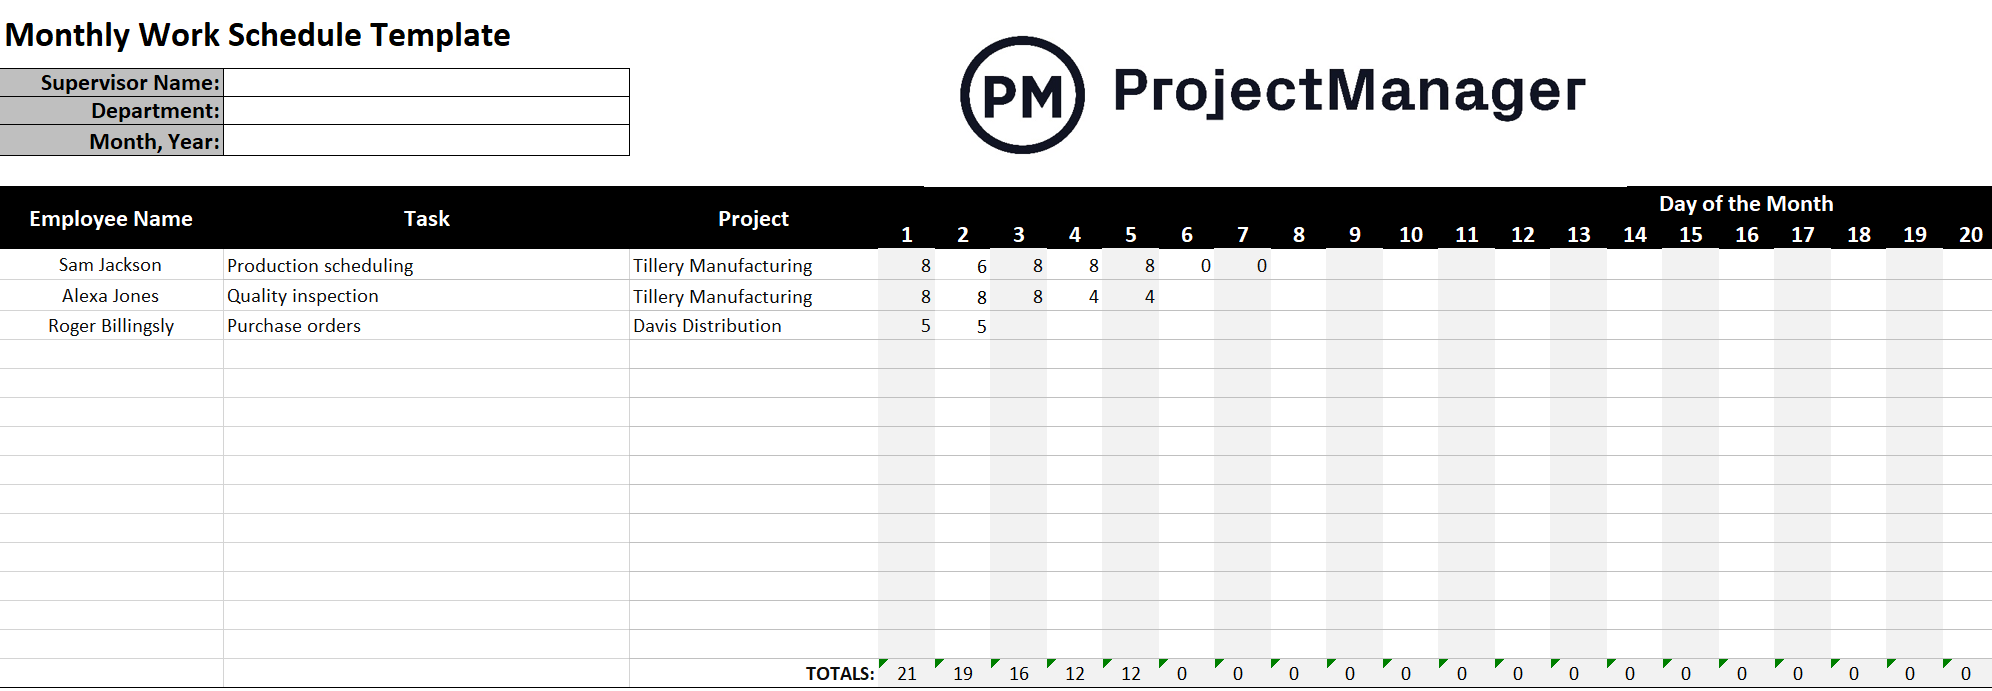 ProjectManager's free monthly work schedule template for Excel